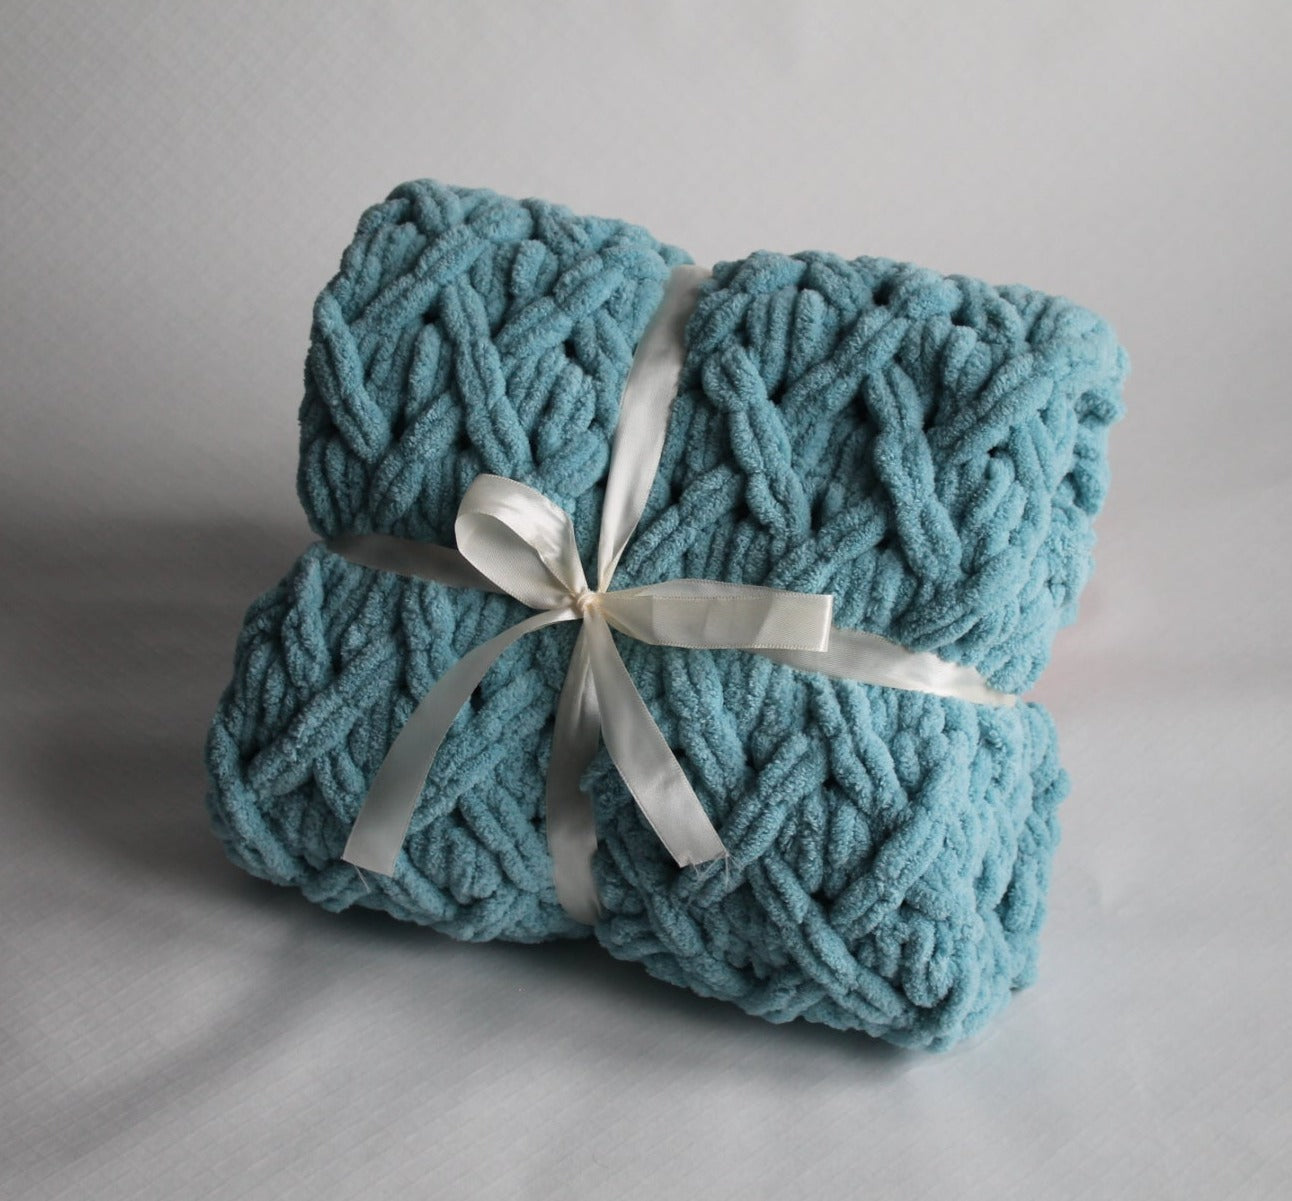 Baby plush blanket in the color of blue with shades of gray